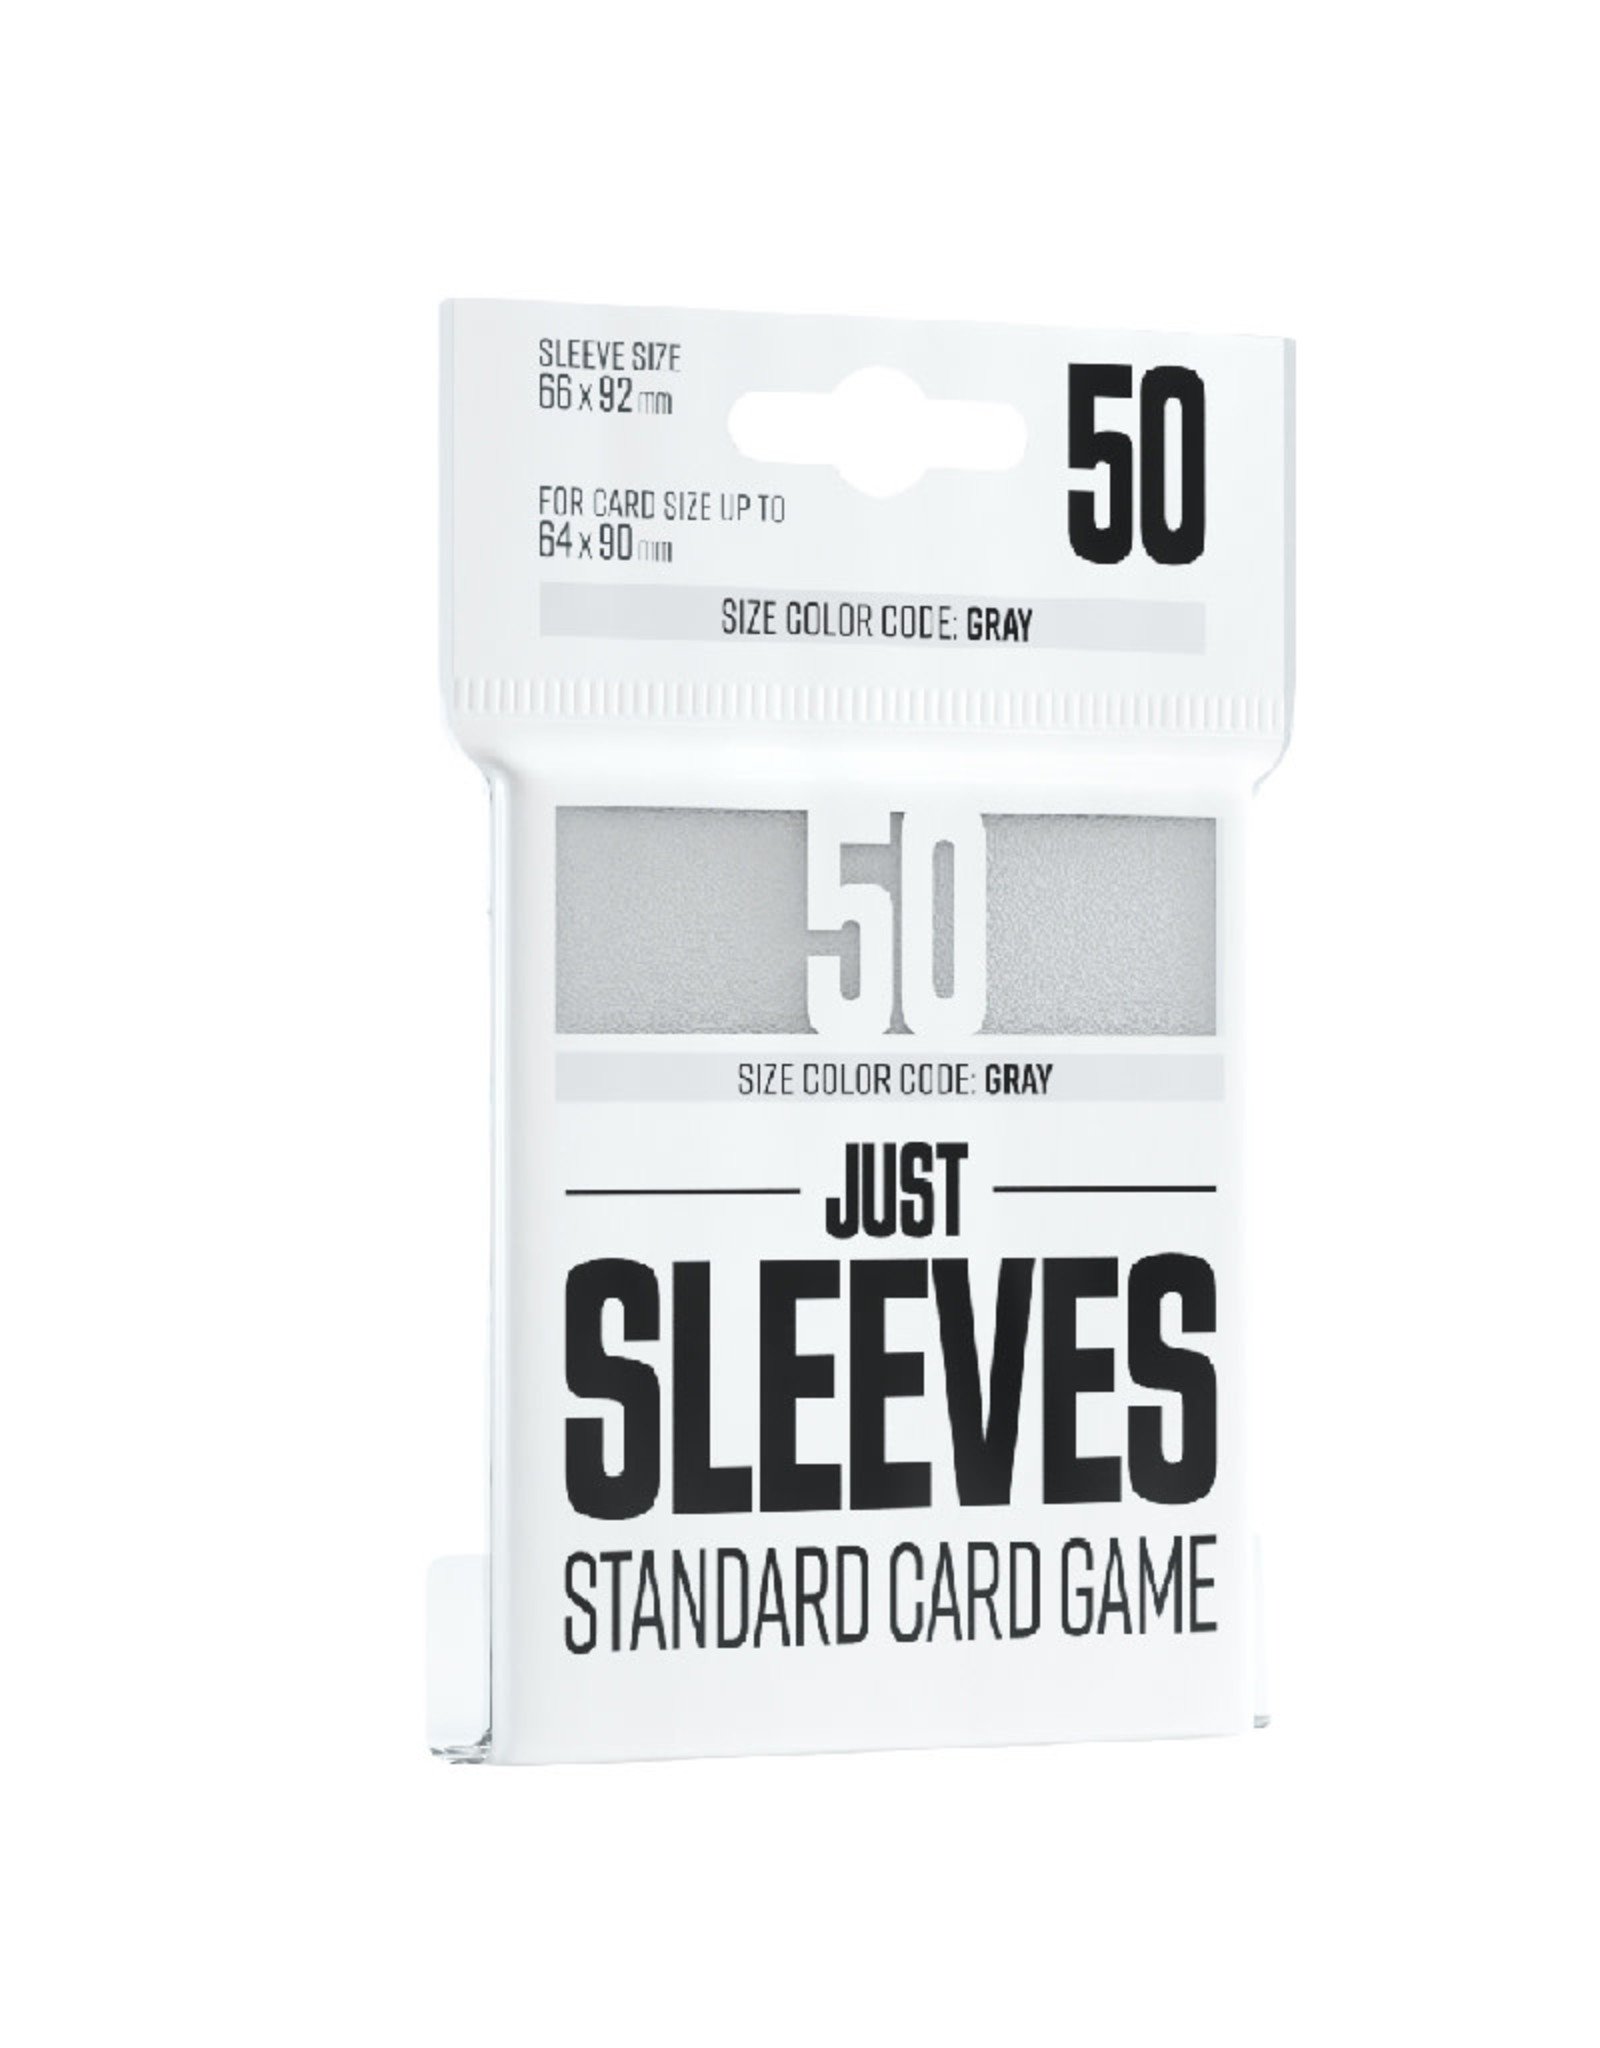 Just Sleeves: Standard Card Game (50) White